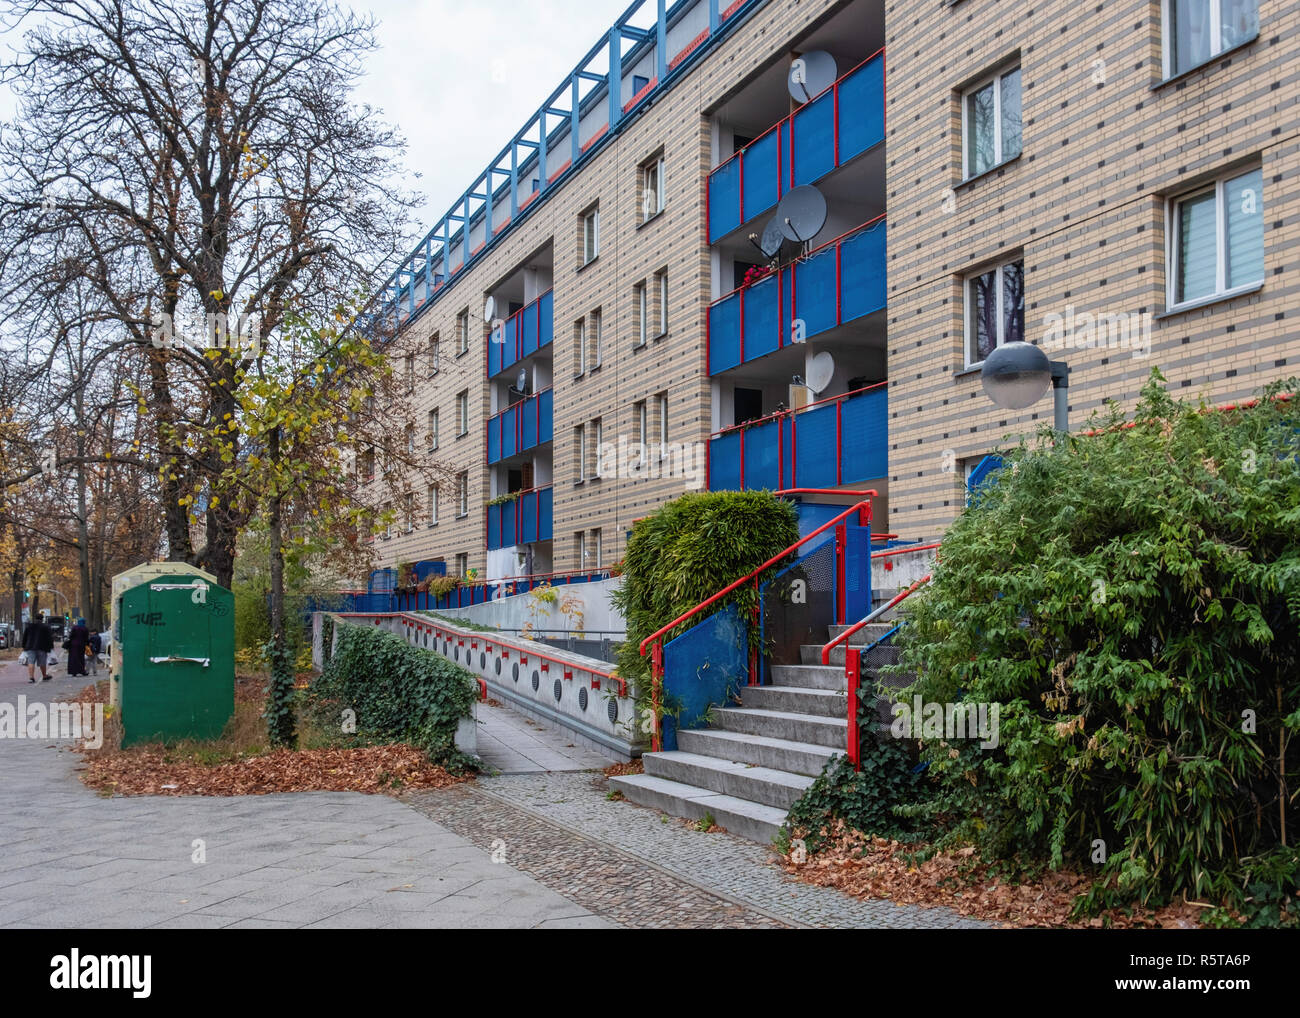 Berlin,Reinickendorf, Colourful exterior of modern apartment building in Bernauer Strasse Stock Photo